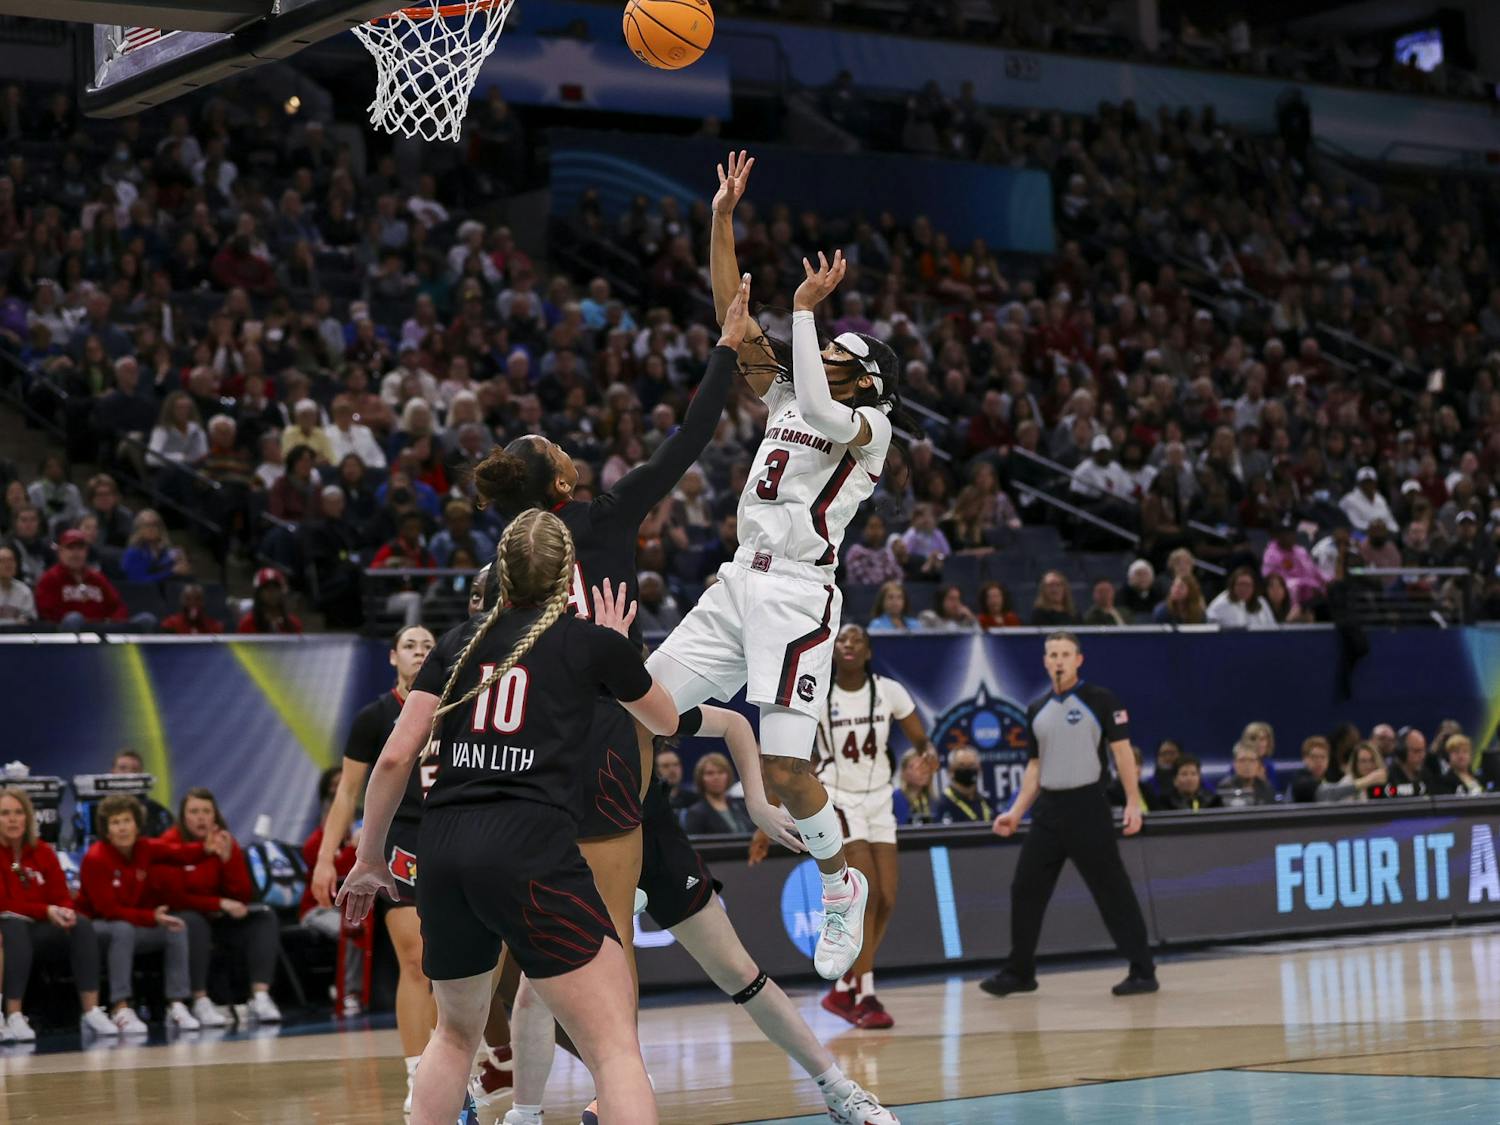 Junior guard Destanni Henderson shoots inside the paint during the first quarter of South Carolina's 72-59 victory over Louisville on April 1, 2022, advancing to the National Championship game.